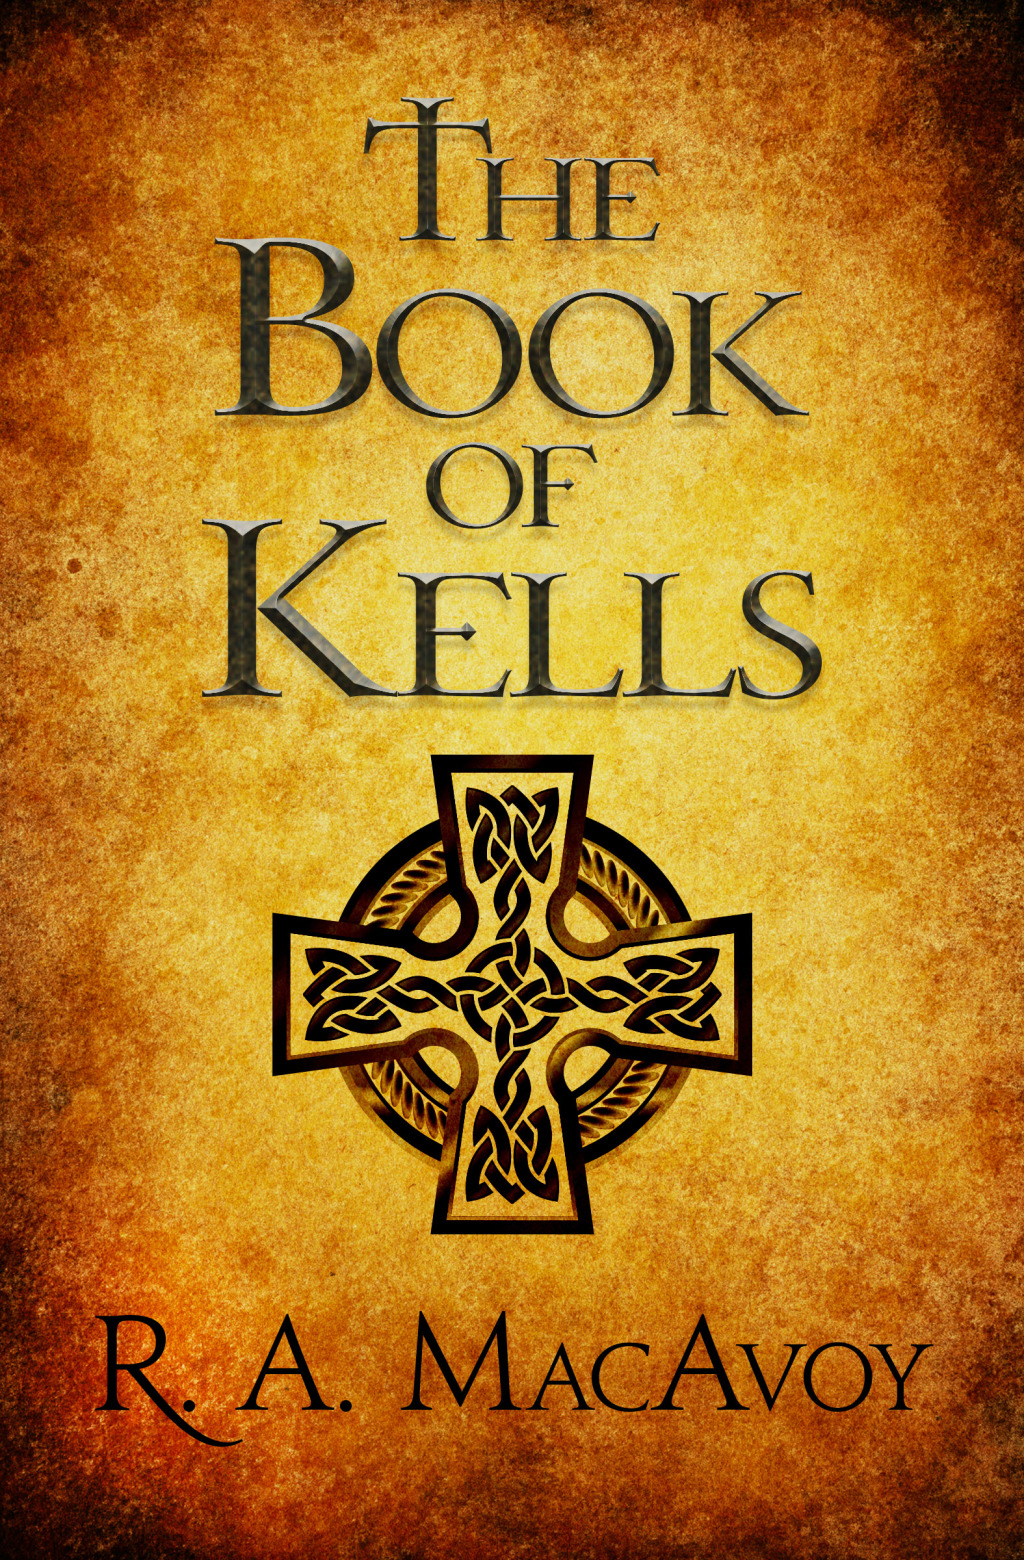 The Book of Kells (eBook) - R. A. MacAvoy,